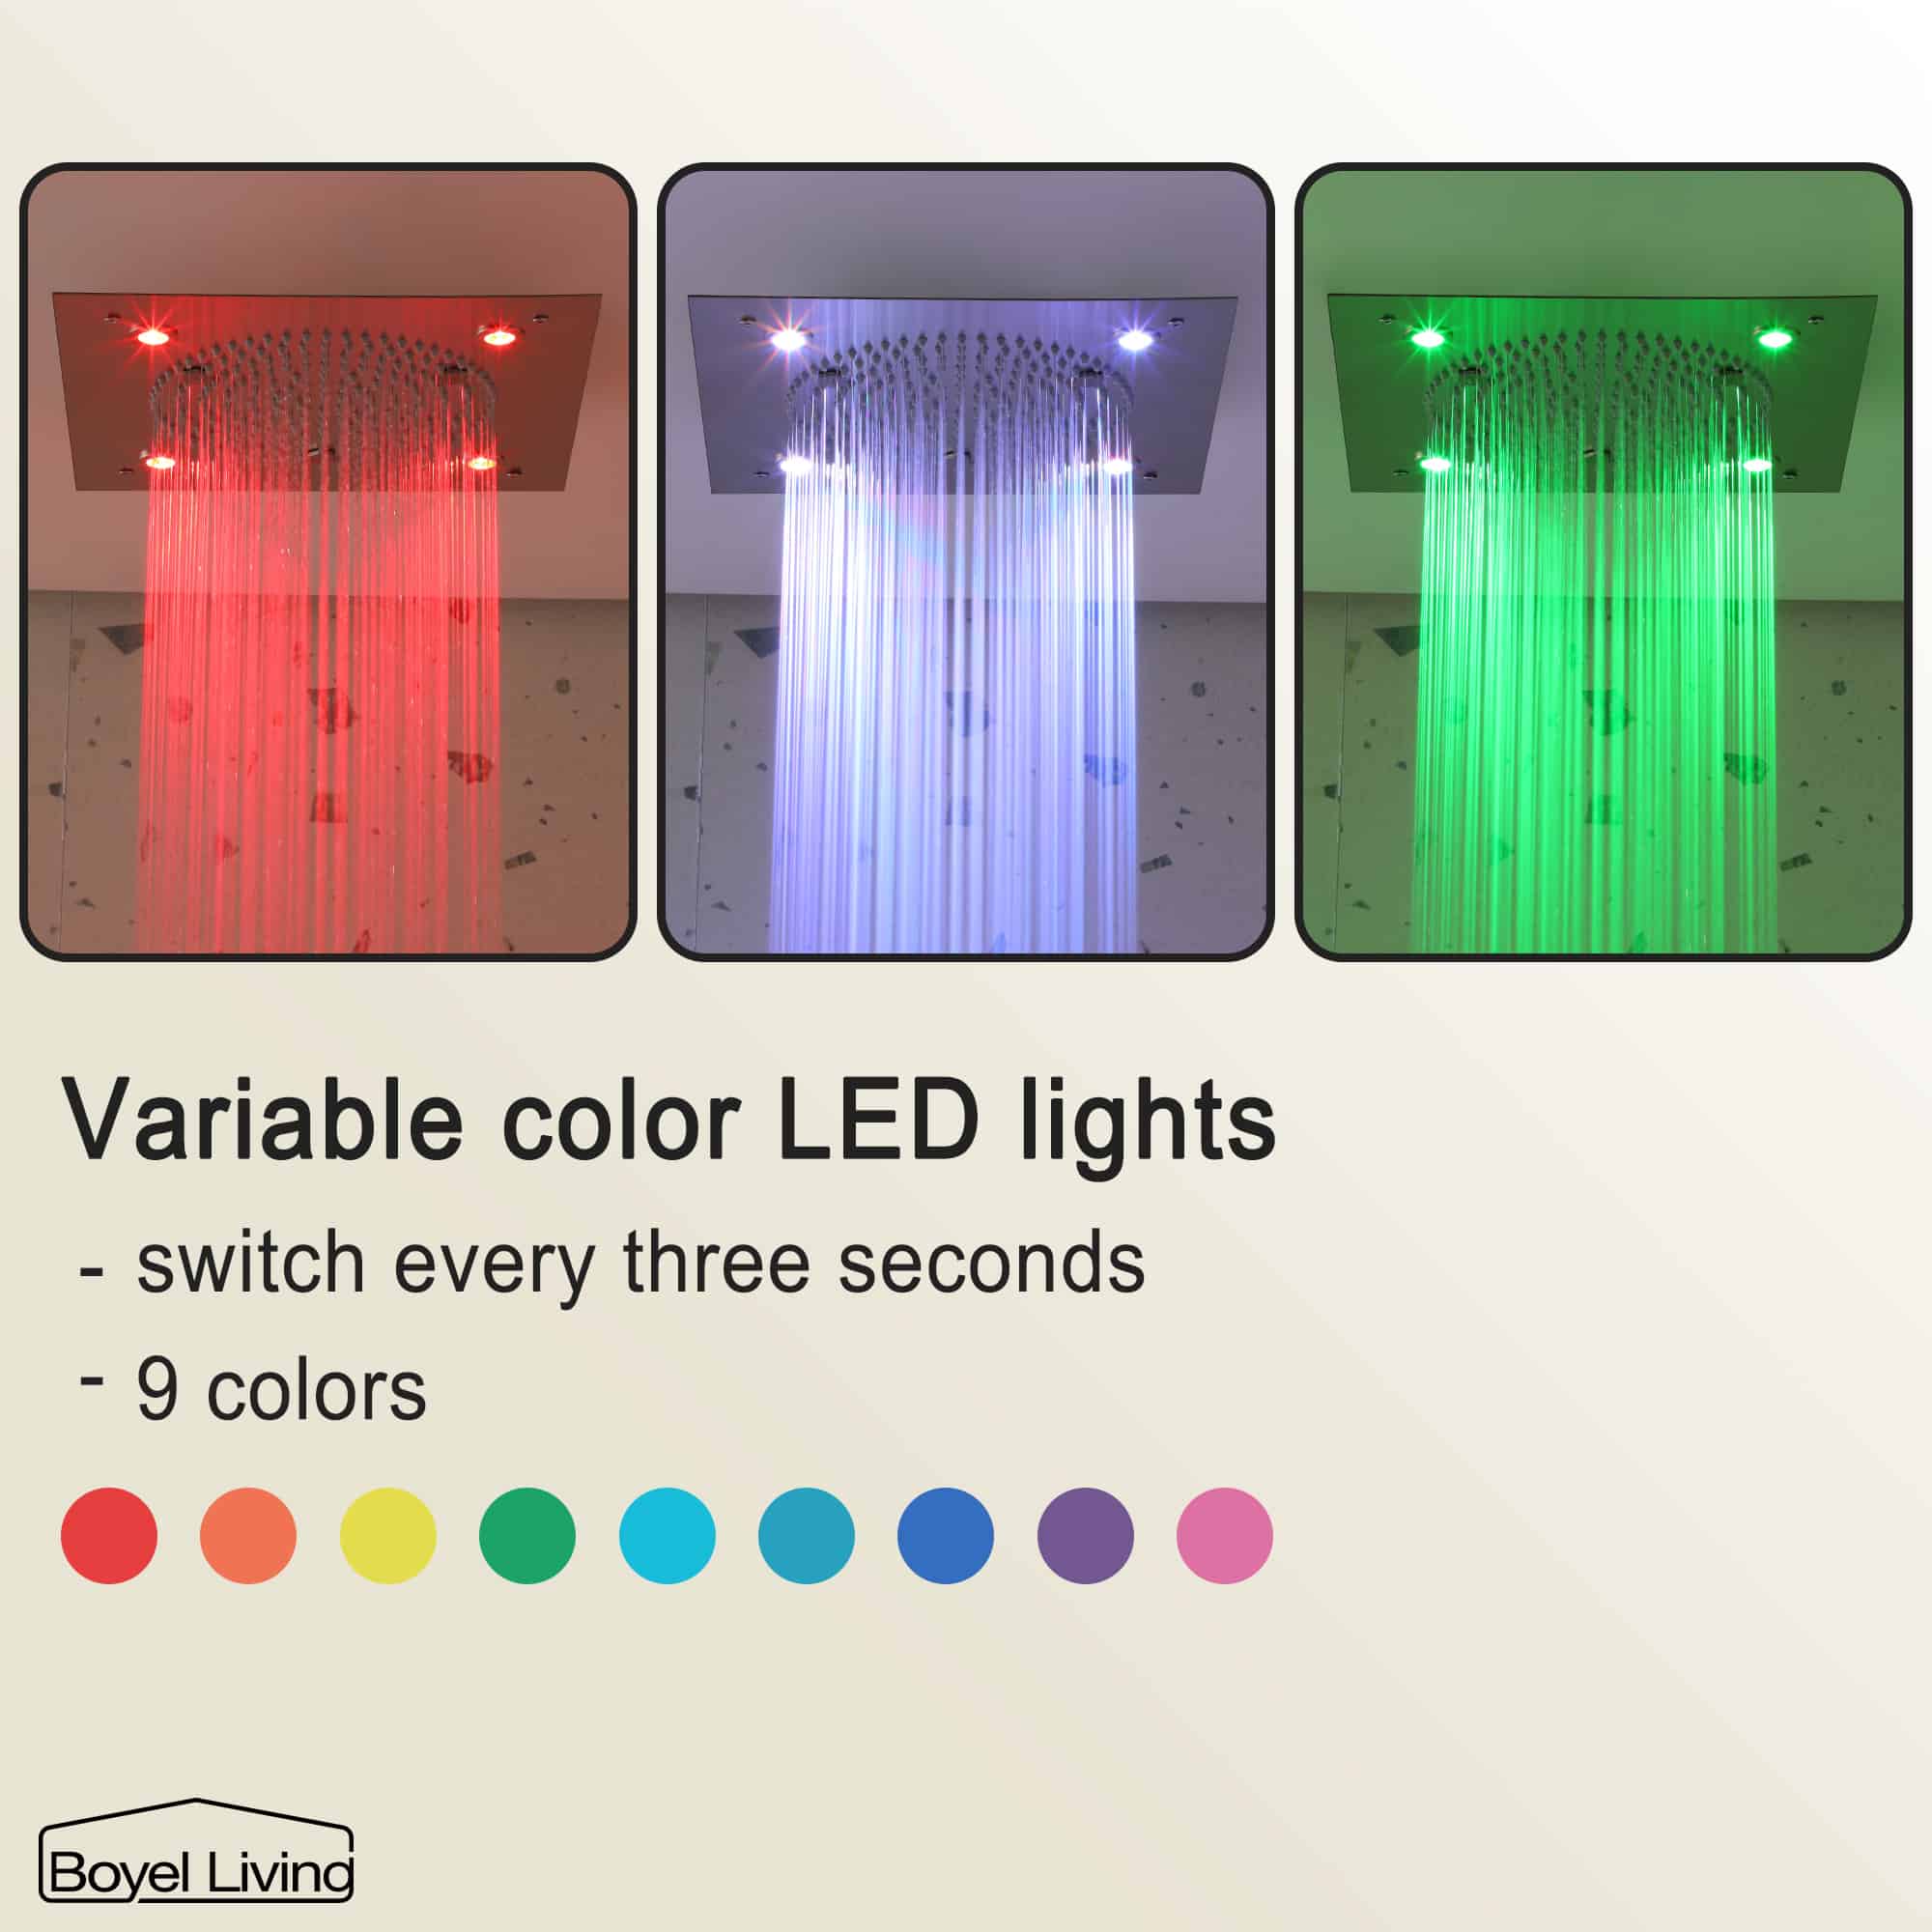 Ceiling Mount Shower Head System with 9 Colors LED Lights